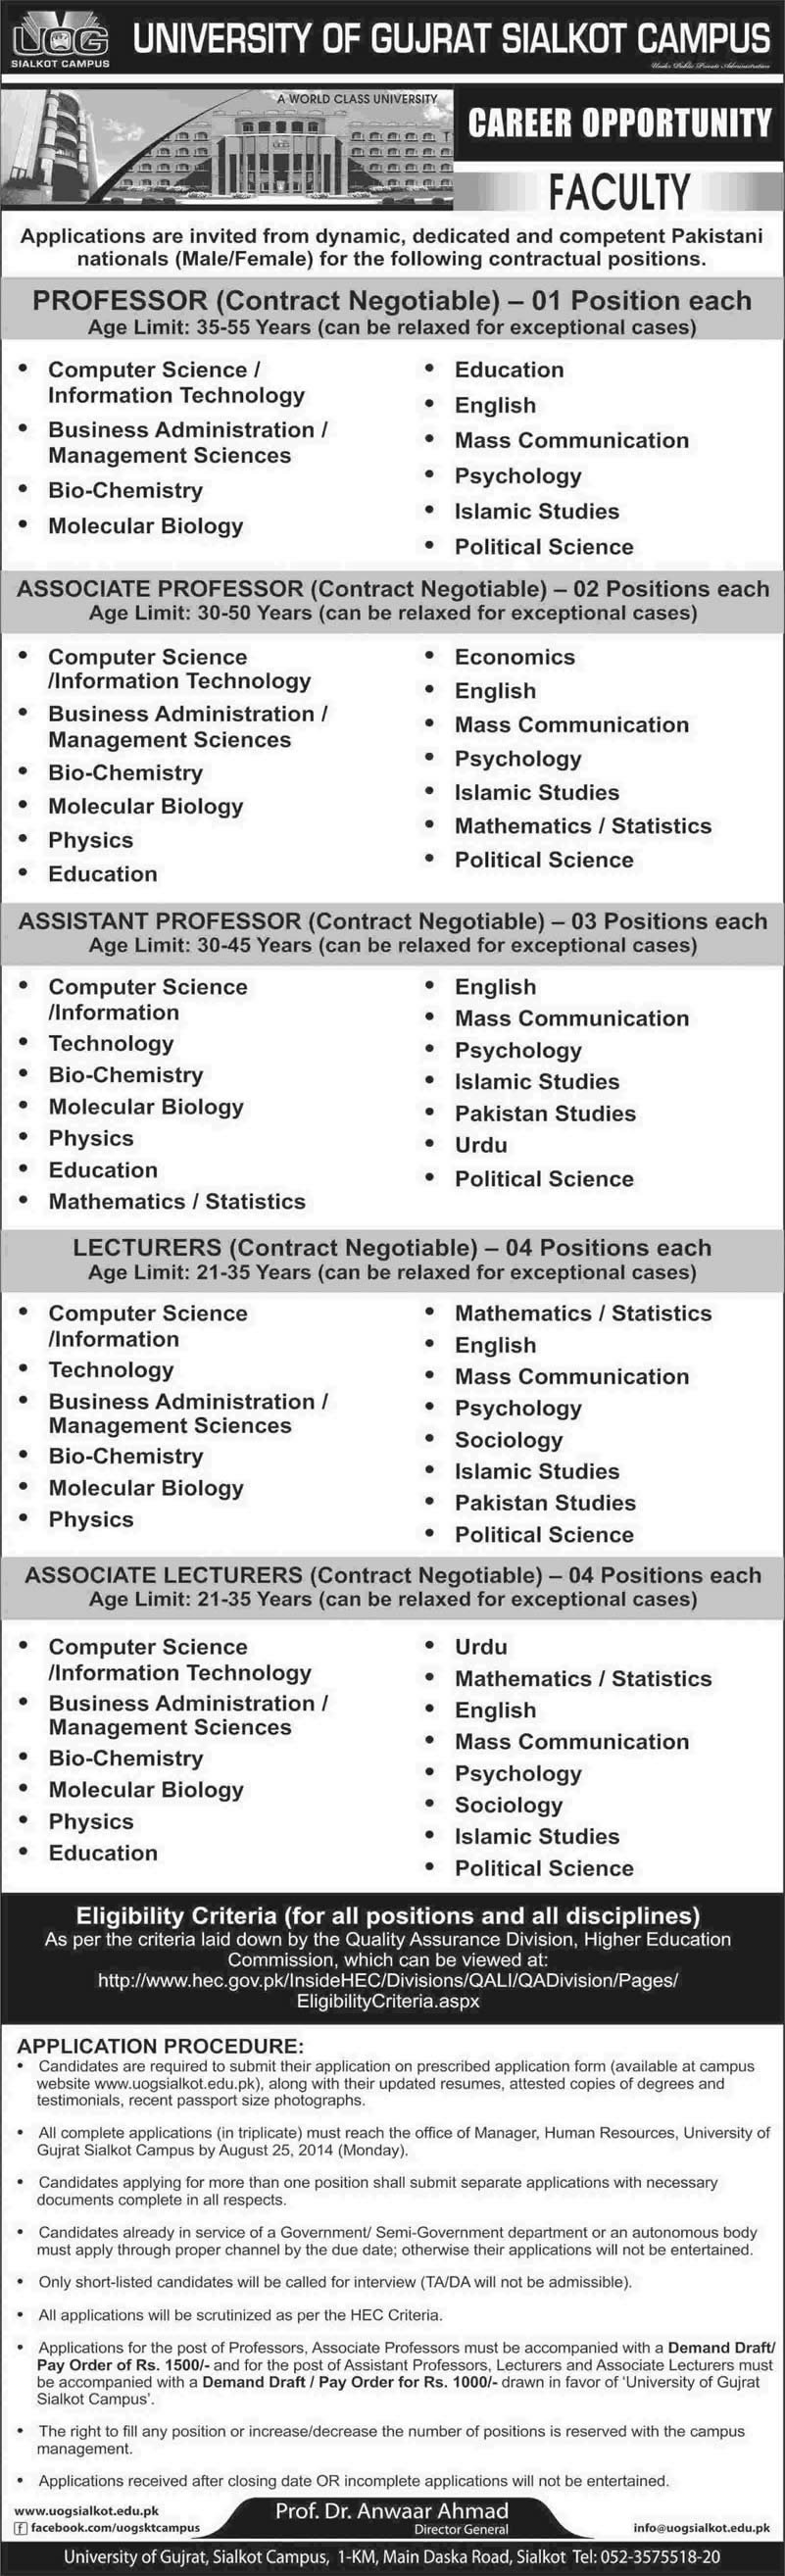 University of Gujrat Sialkot Campus Jobs 2014 August for Teaching Faculty